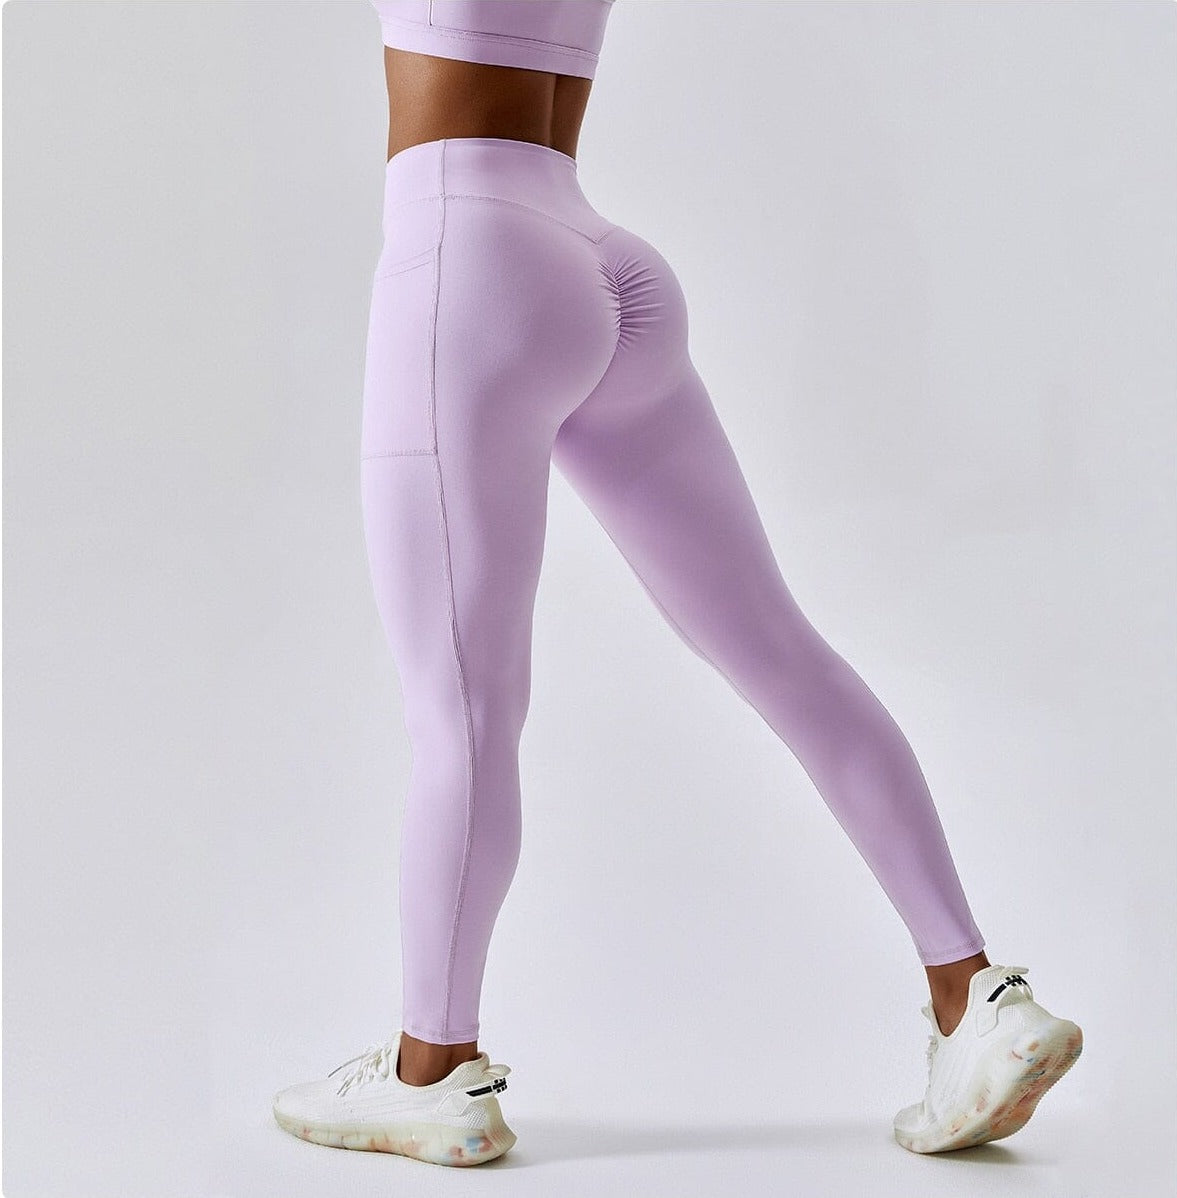 1. NCLAGEN Yoga Pants Hip Lifting Pocket Quick Dry Fitness Pants Tight Running Leggings Women Breathable Gym Sport Workout| | Home Truetights 